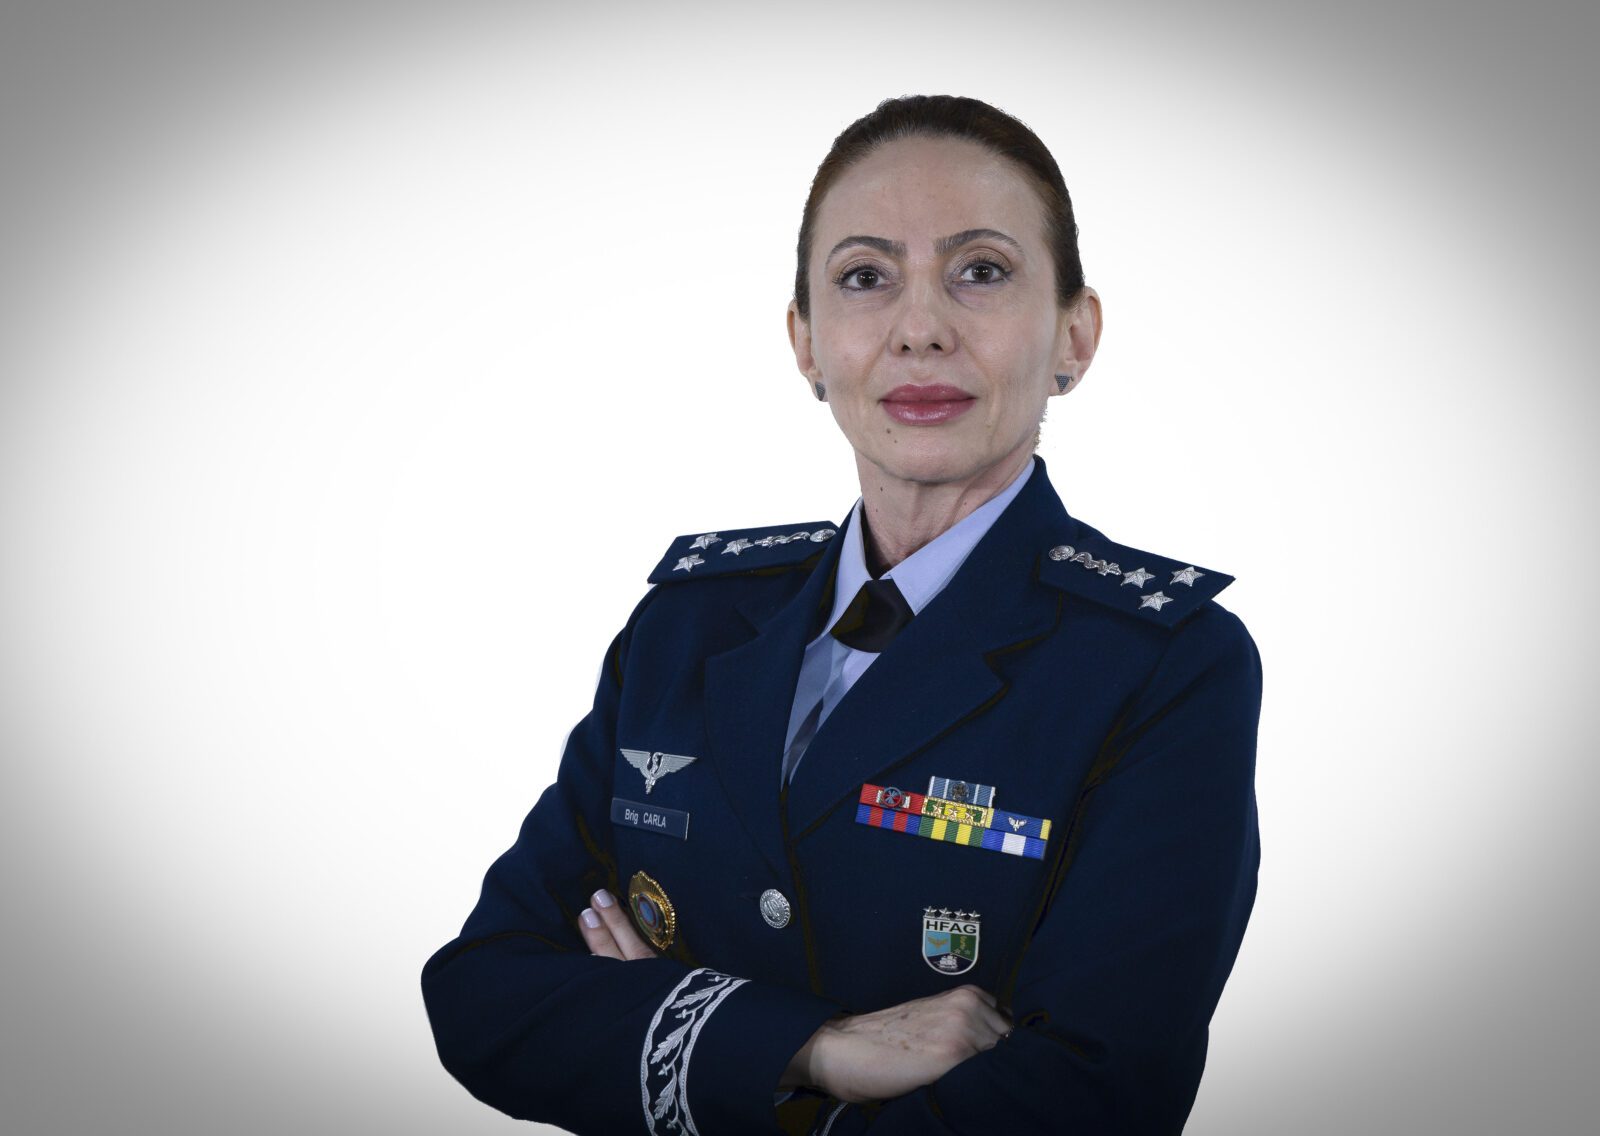 Brazil has first woman promoted to Major Brigadier